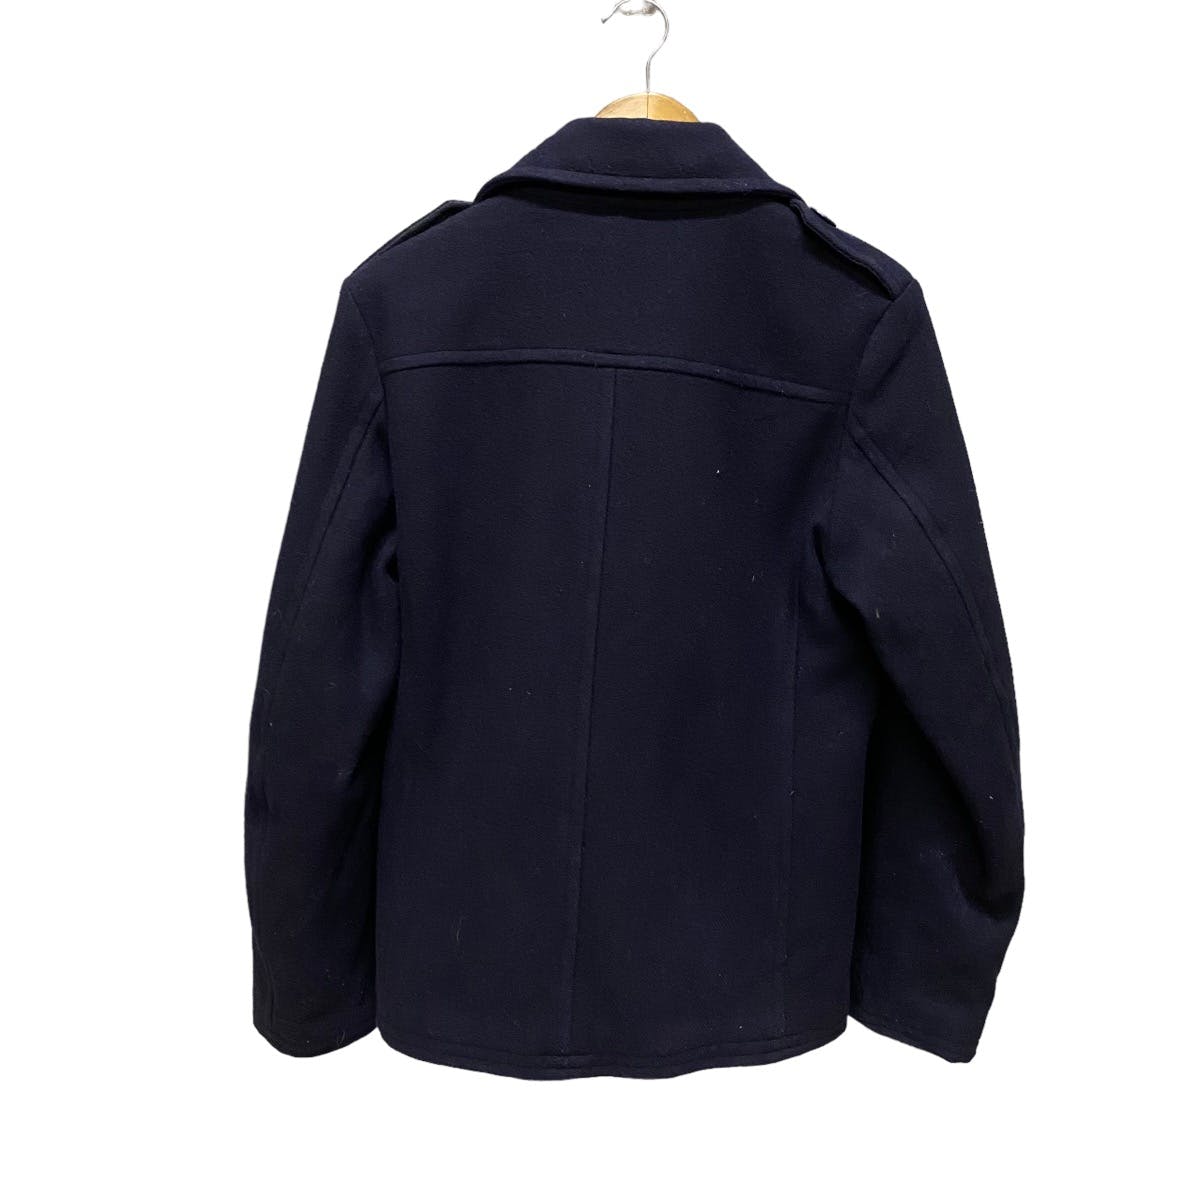 Fred Perry double breasted wool jacket - 5